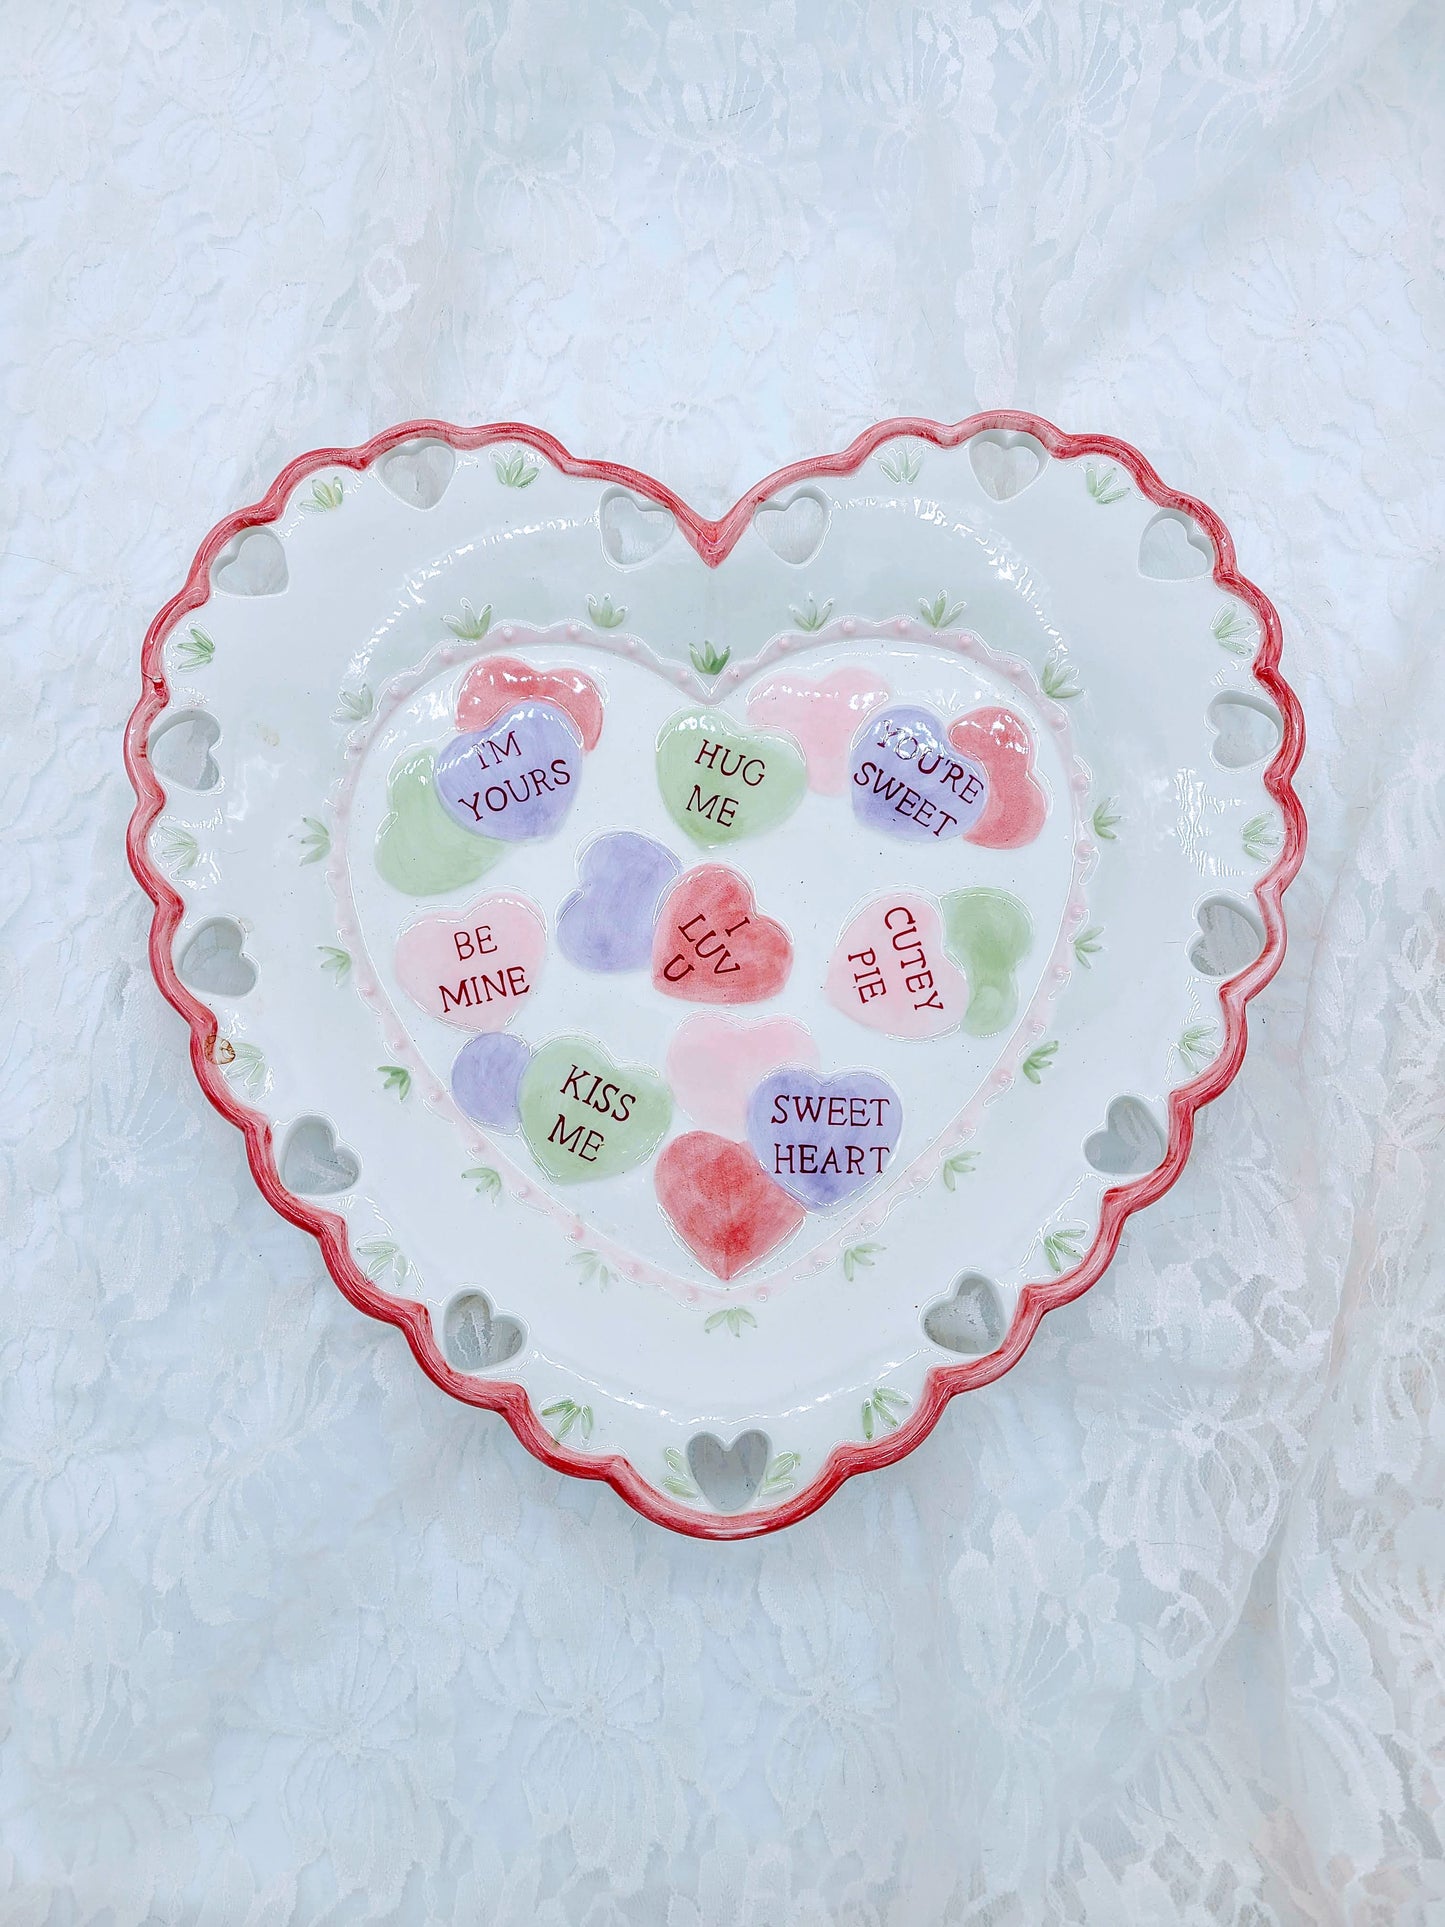 Perfect Valentine's Day Plate for CUPCAKES or anything ~ Candies, Serving, or Display